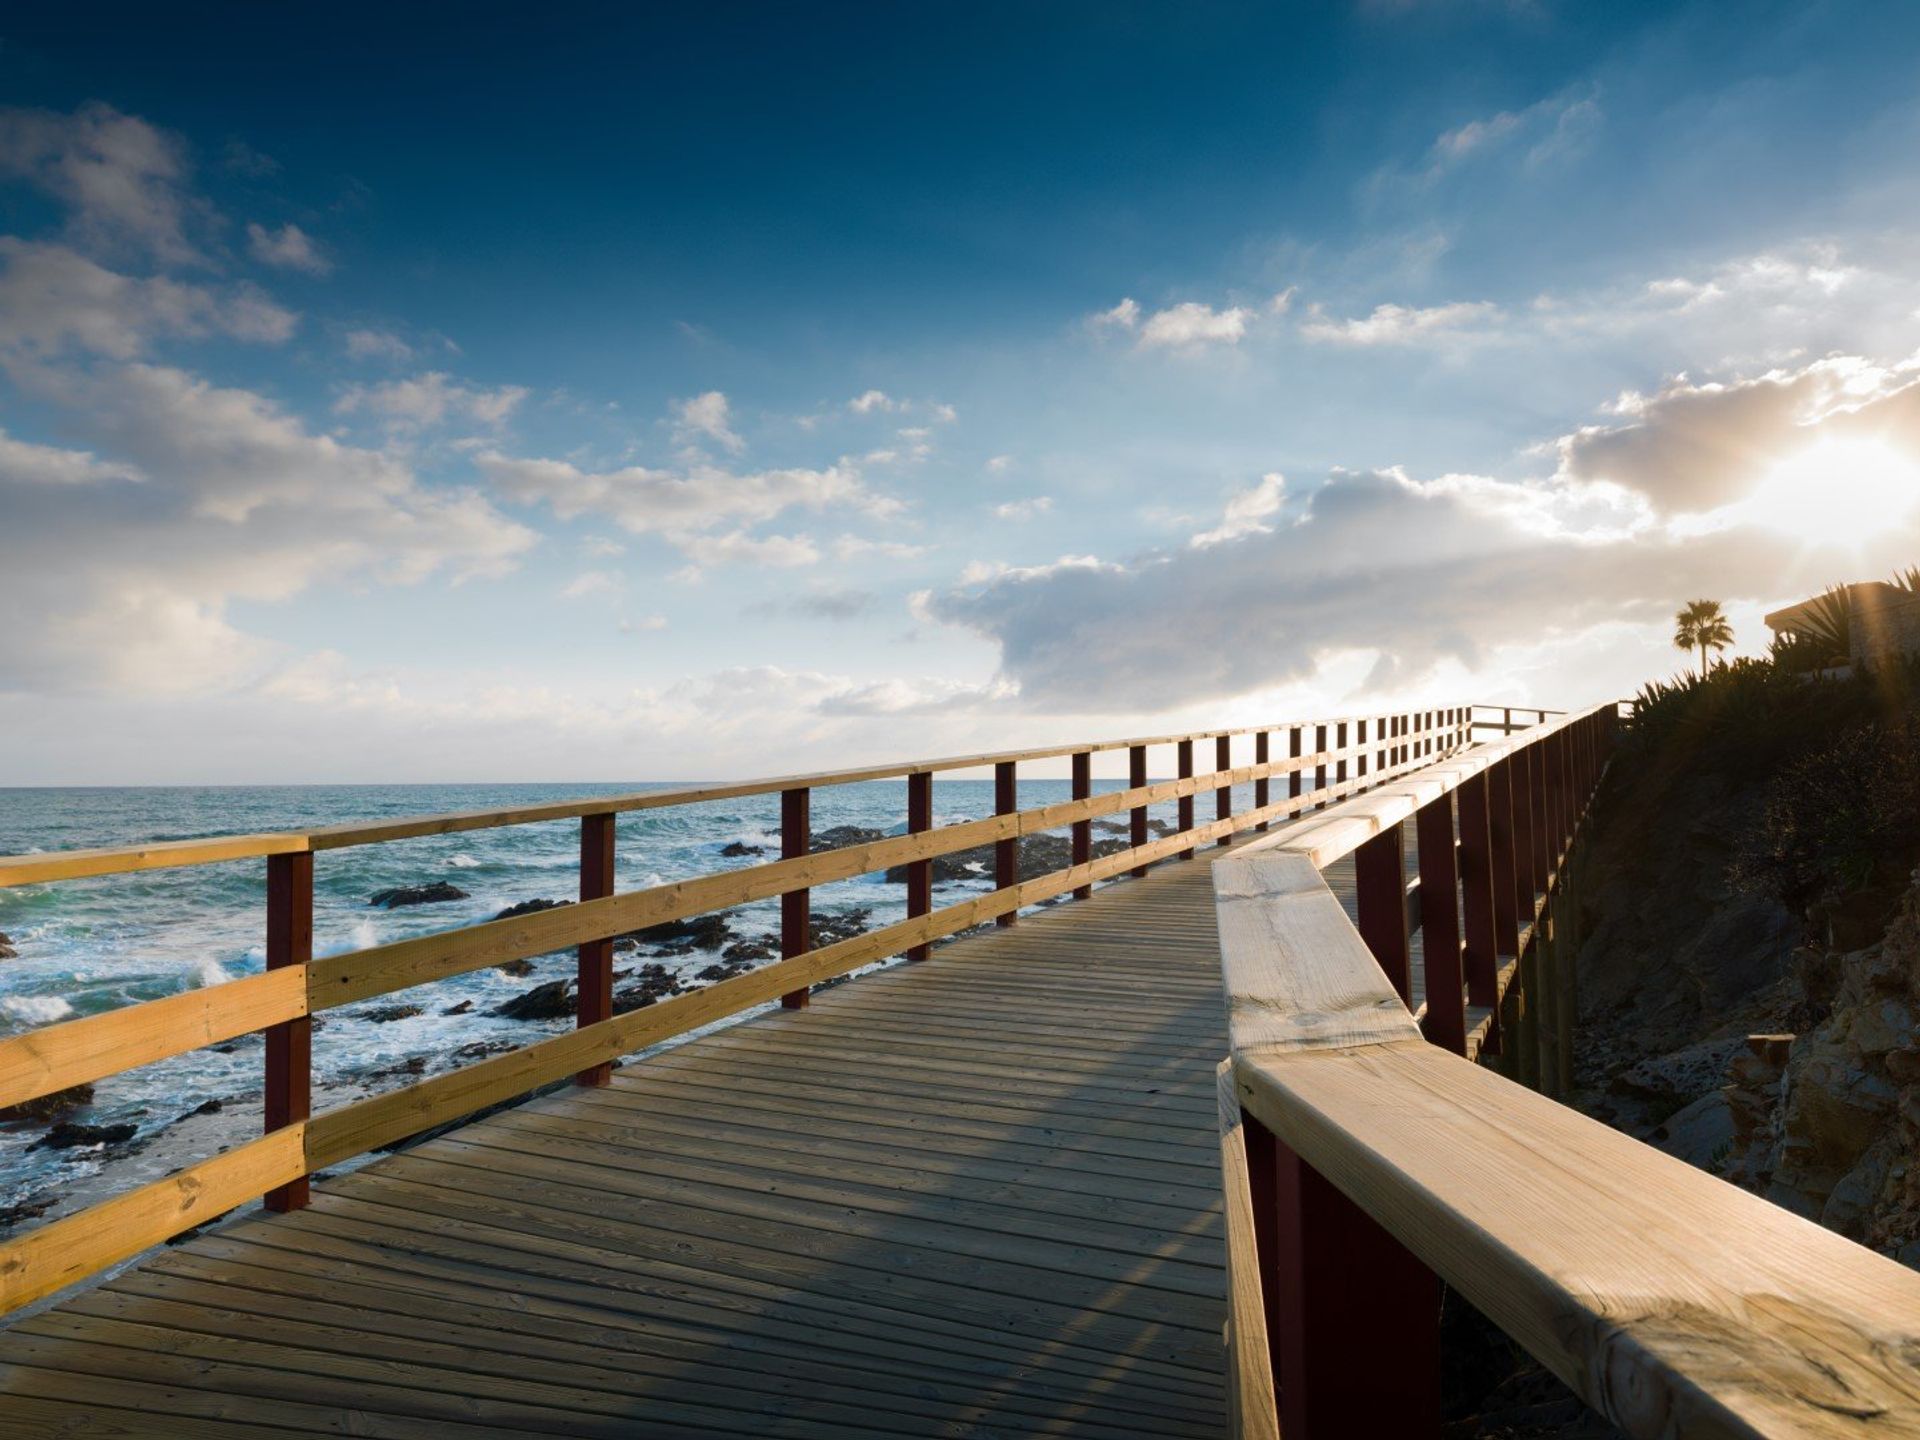 The breathaking wooden promenade of Calahonda Beach at sunset, 30 minutes from Mijas Town